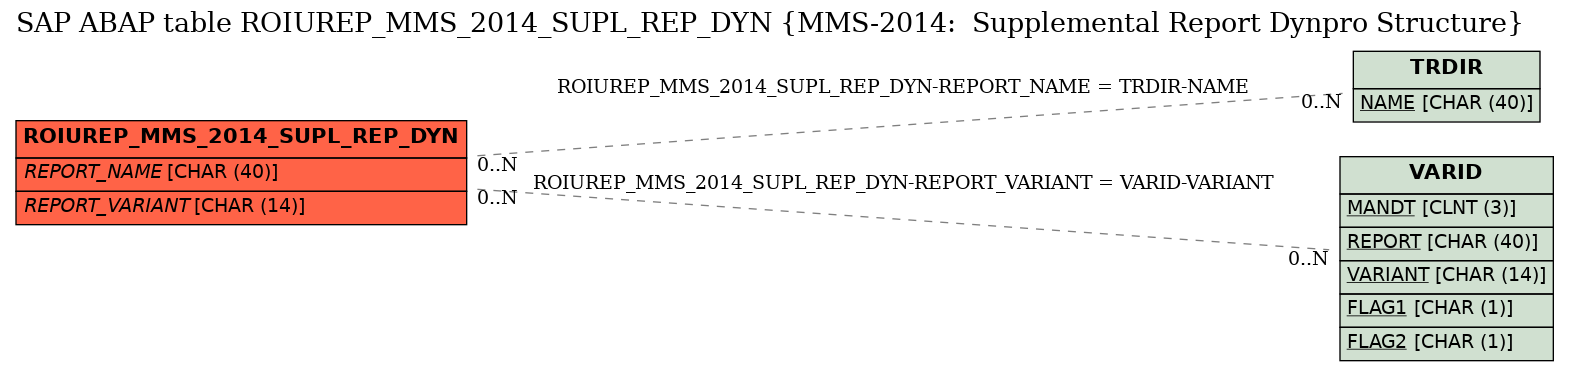 E-R Diagram for table ROIUREP_MMS_2014_SUPL_REP_DYN (MMS-2014:  Supplemental Report Dynpro Structure)